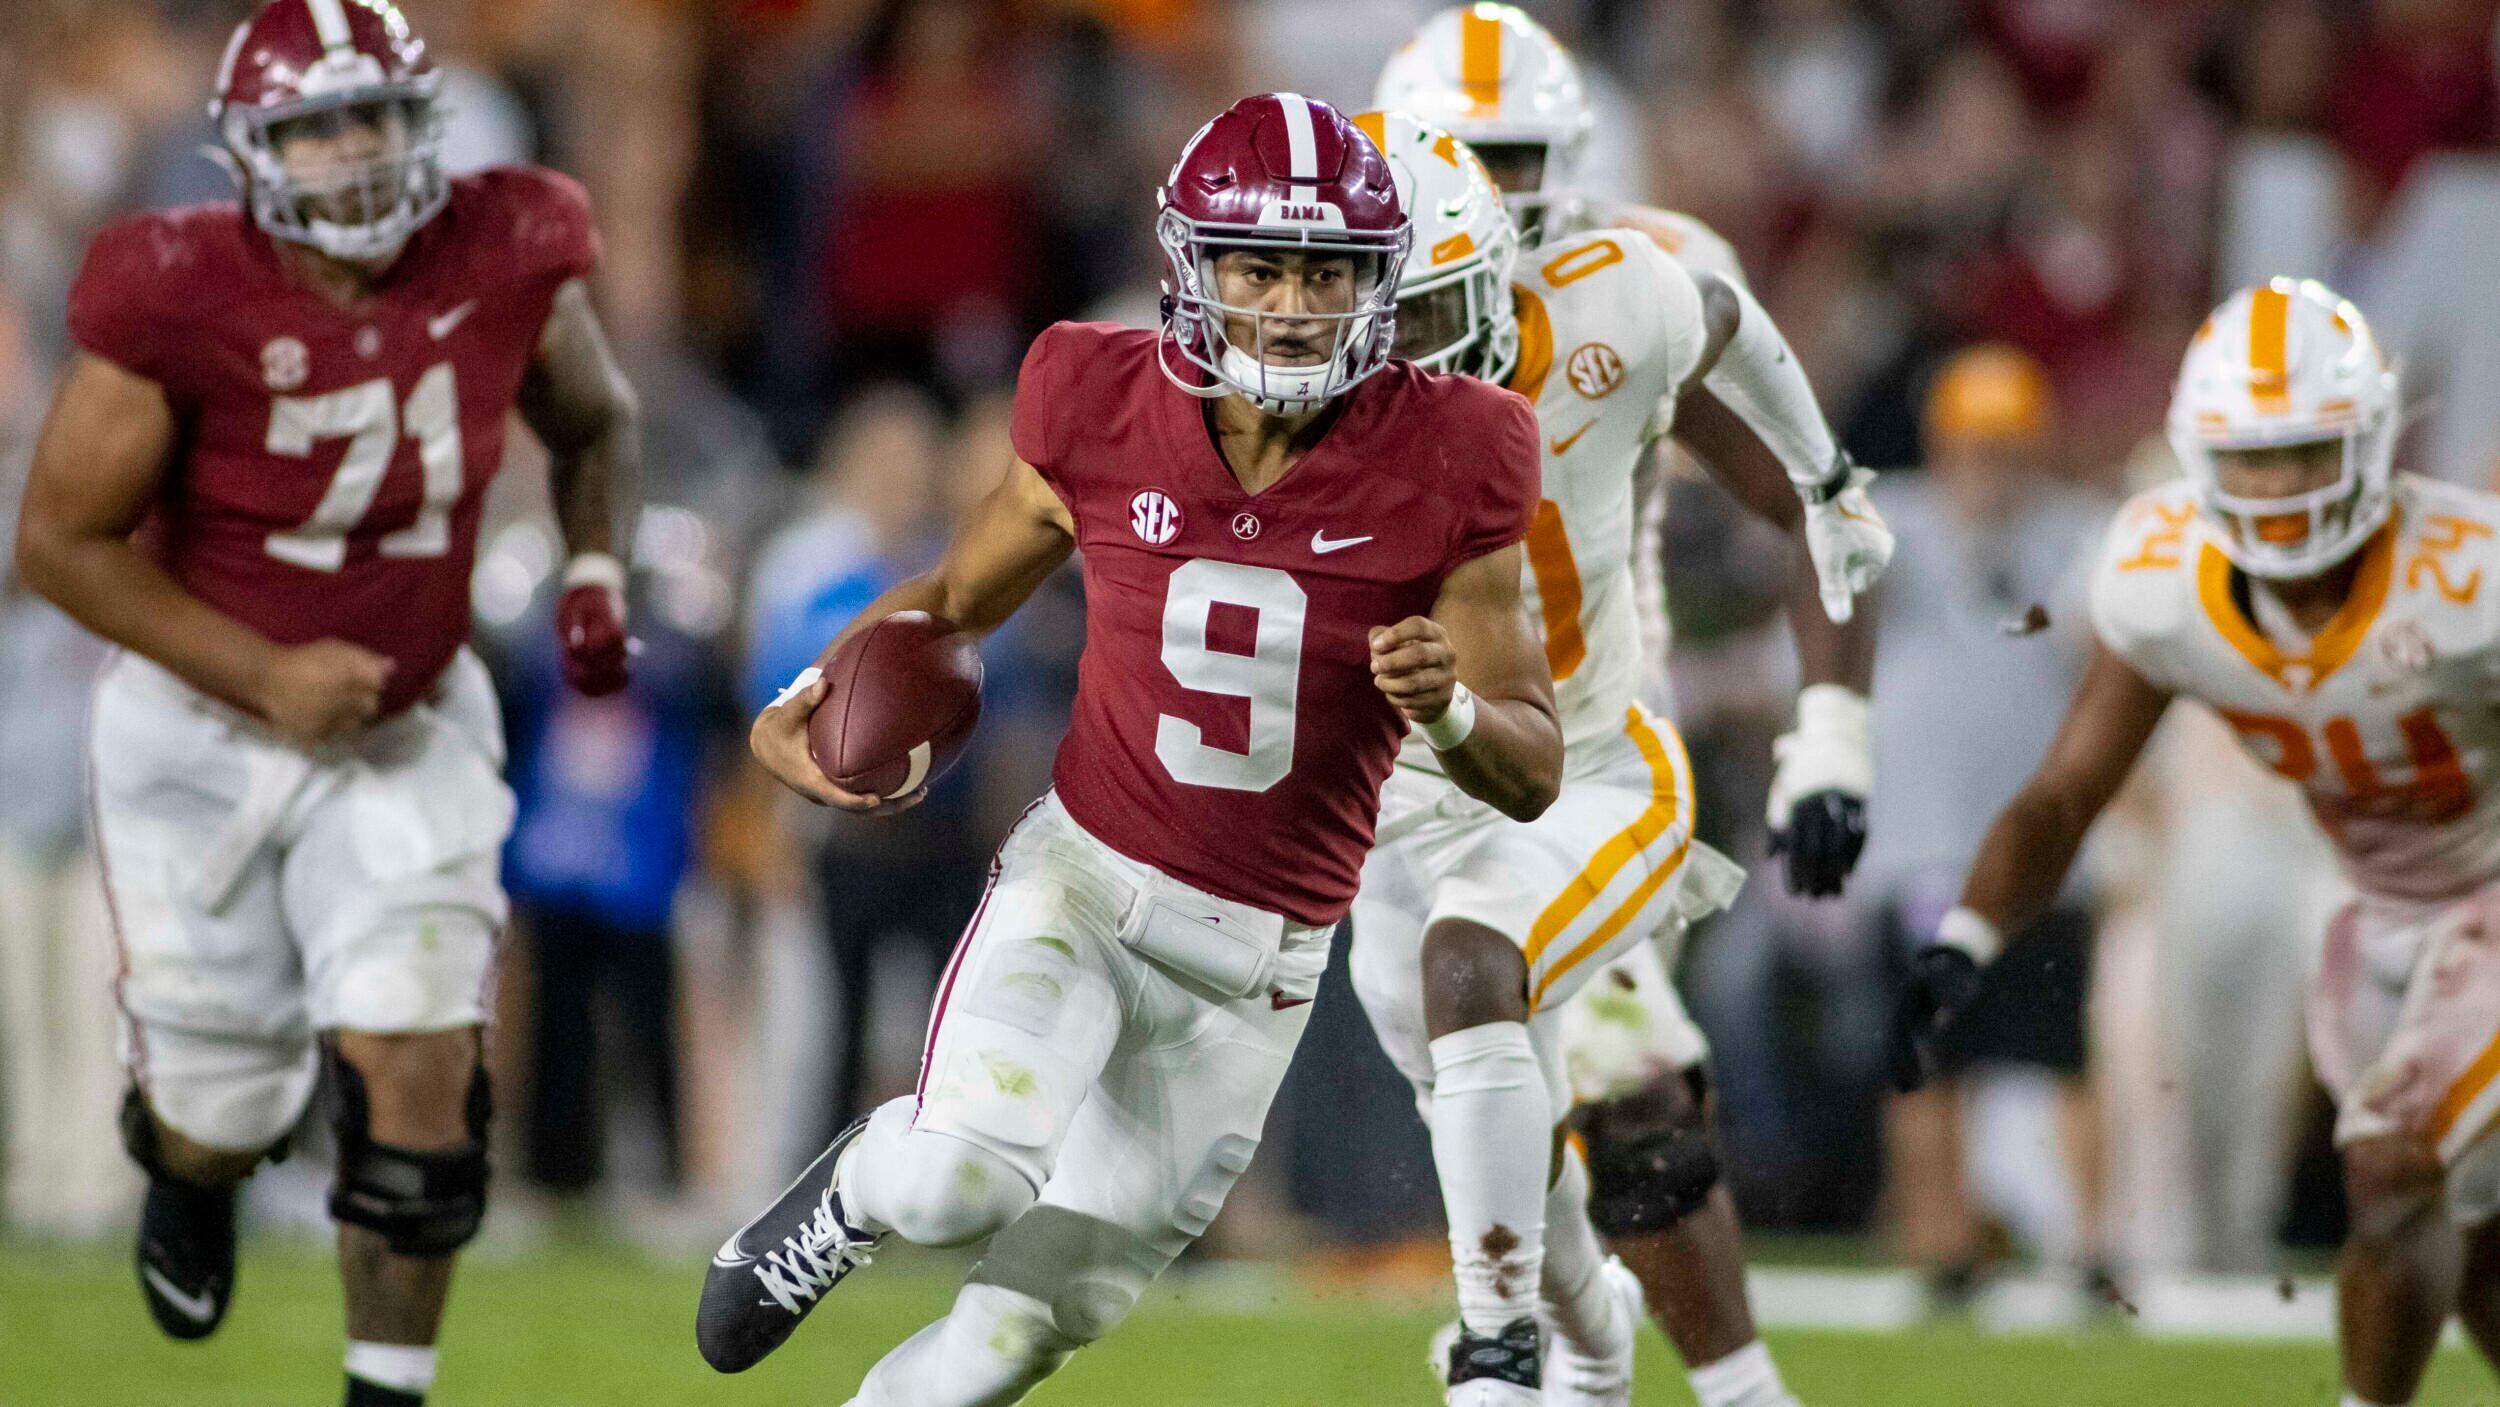 Alabama quarterback Bryce Young (9) runs the ball during the second half of an NCAA college football game against Tennessee, Saturday, Oct. 23, 2021, in Tuscaloosa, Ala.